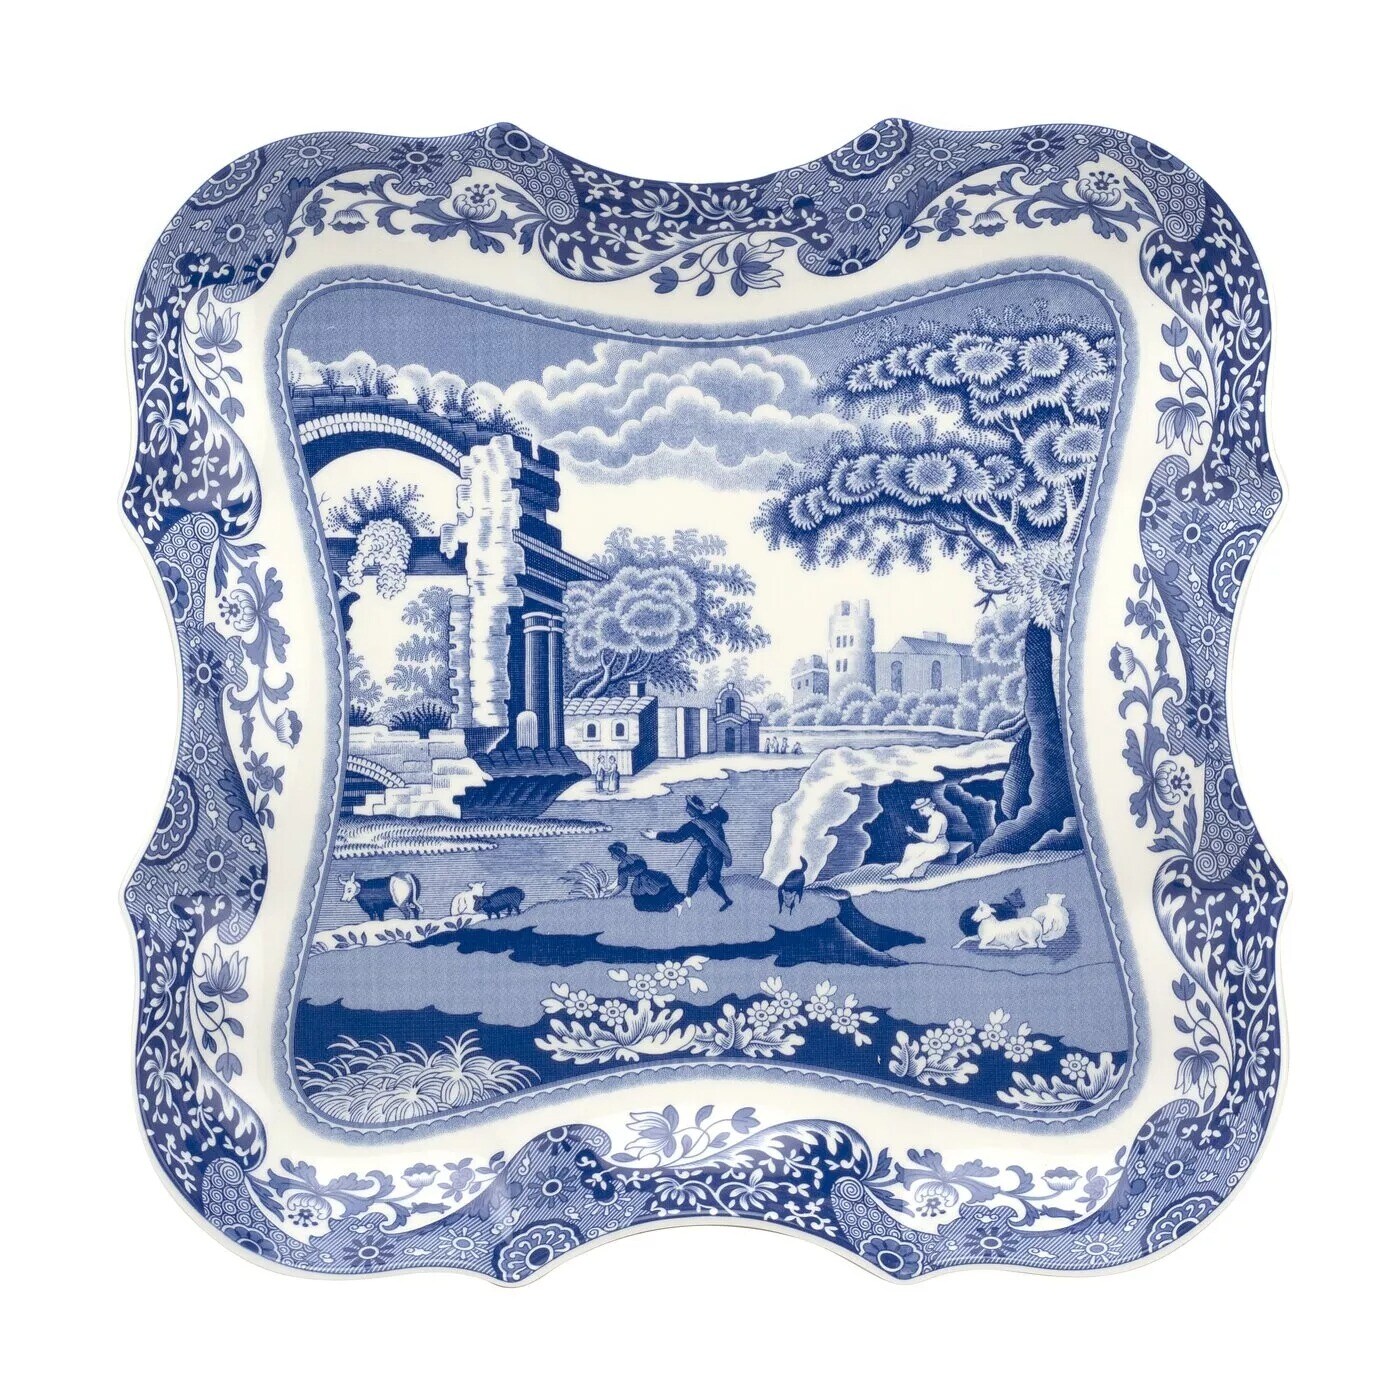 Spode Blue Italian Collection 14 Inch Porcelain Devonia Tray - Blue White